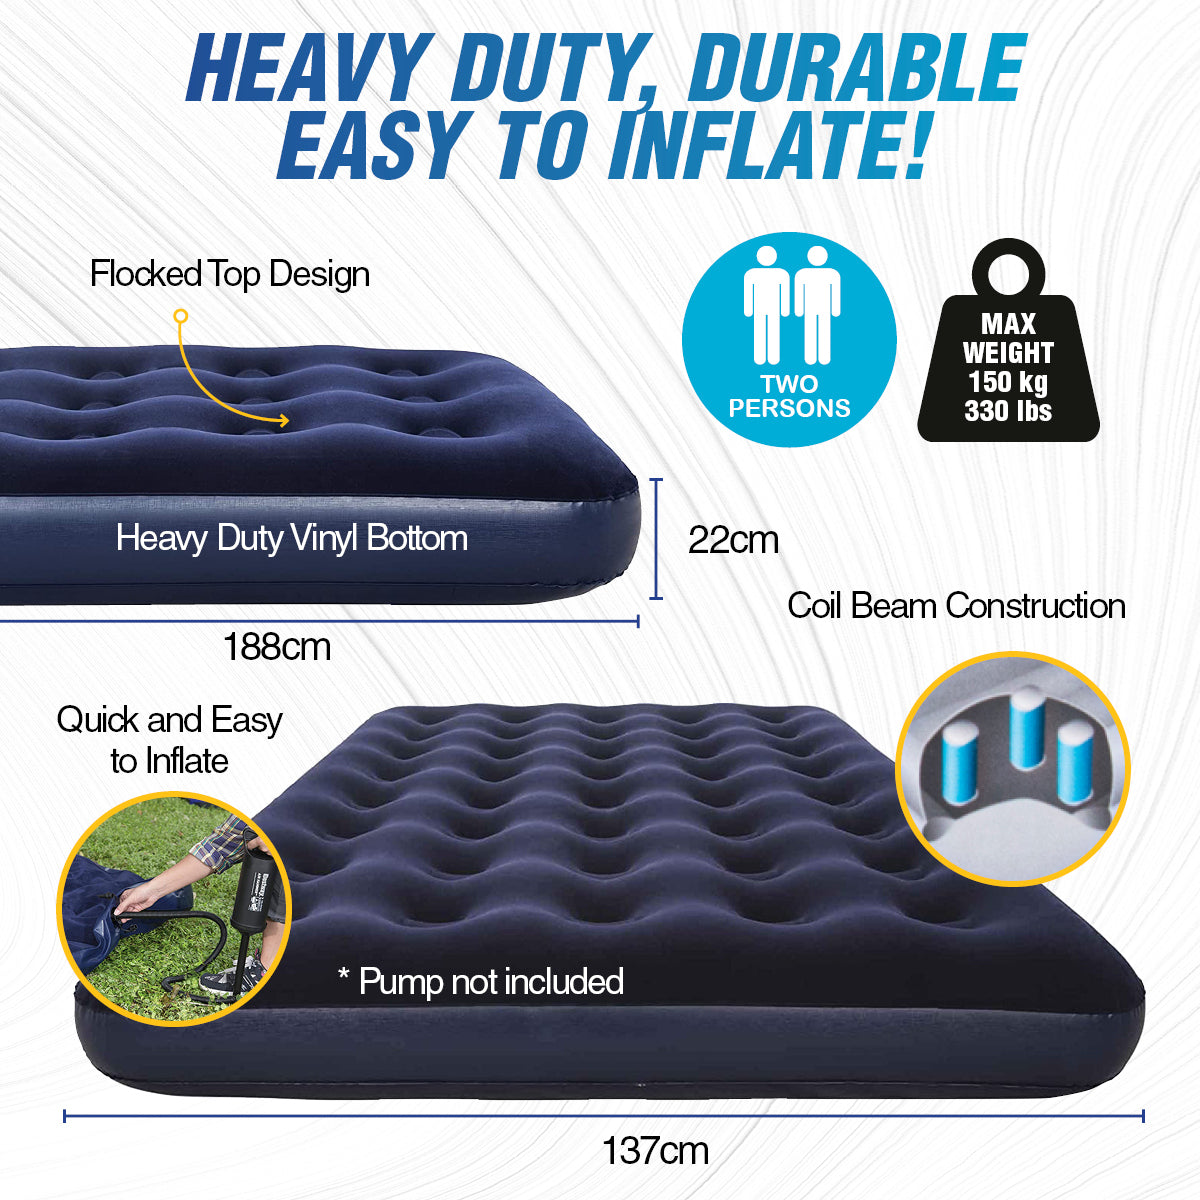 Double Inflatable Air Bed Heavy Duty Durable Camping